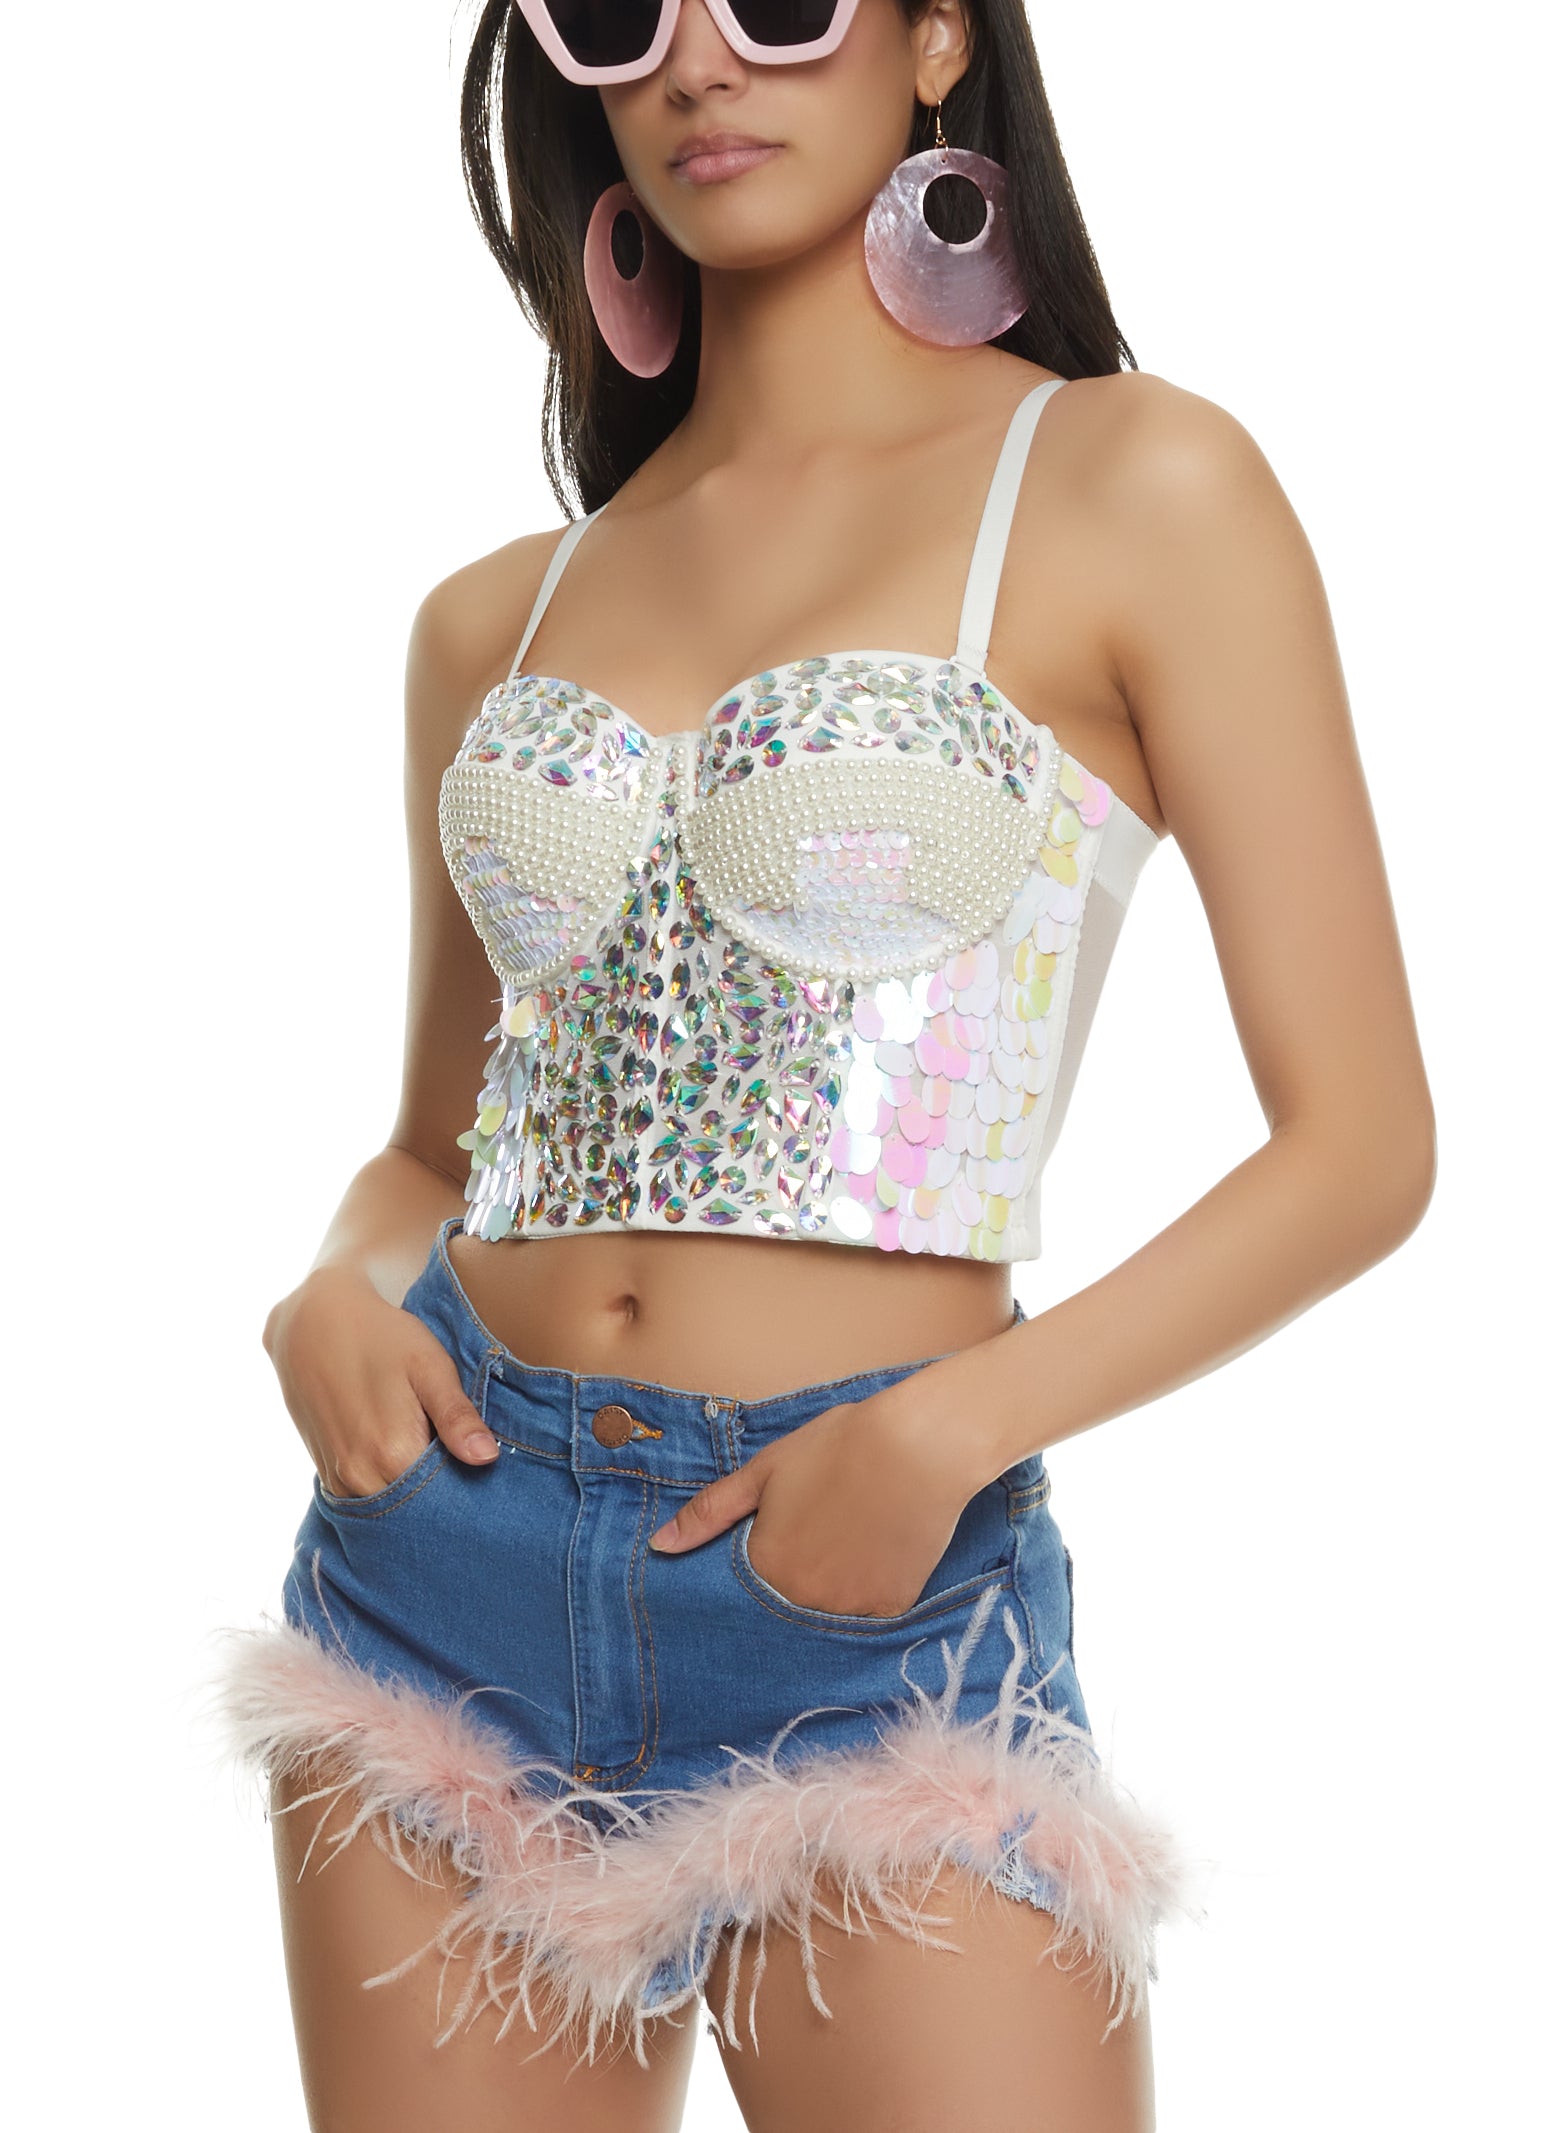 Gem Rhinestone Faux Pearl Studded Bustier Top - White